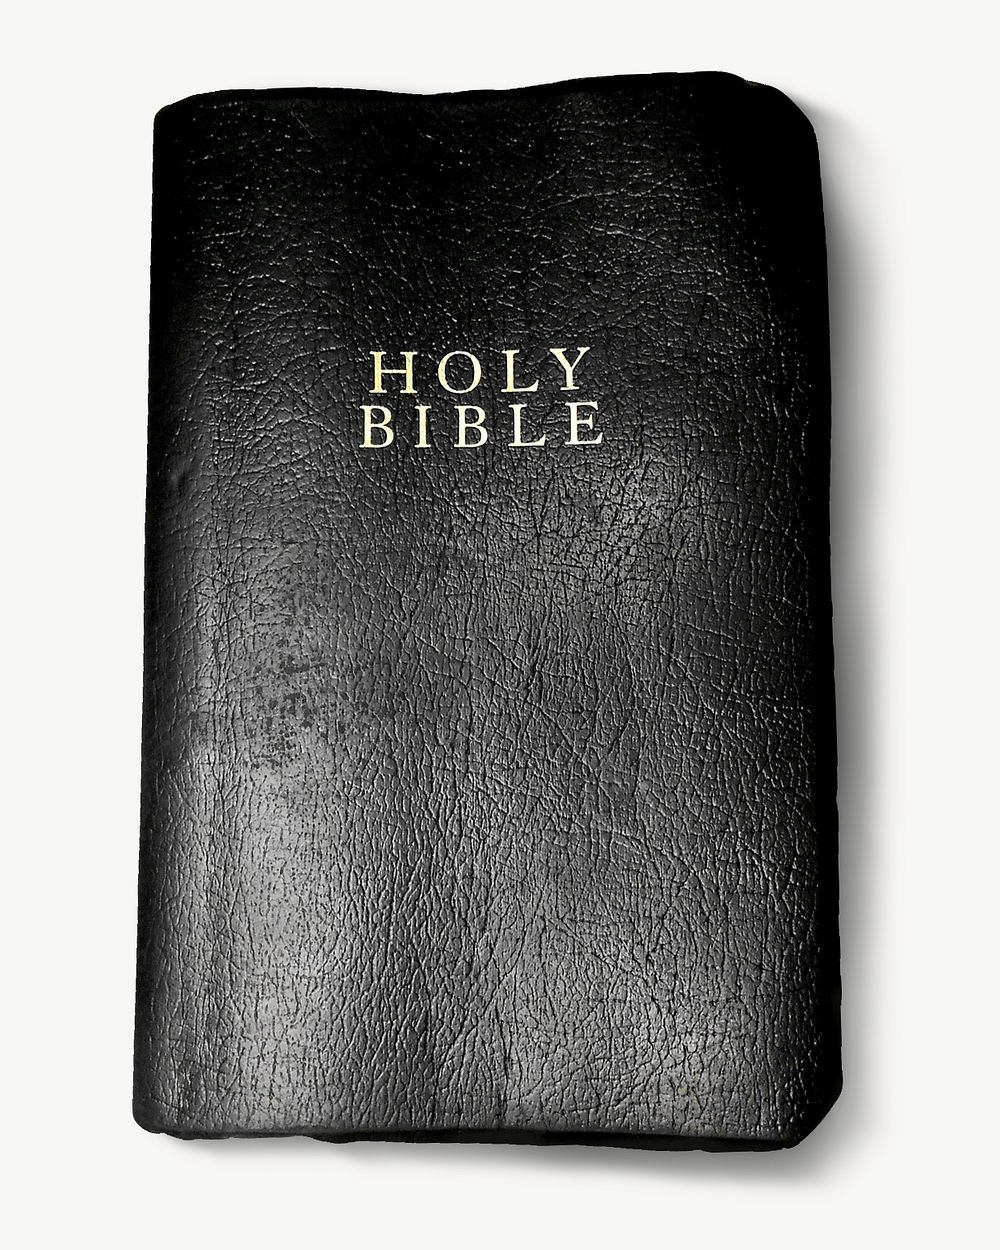 Holy Bible book collage element psd